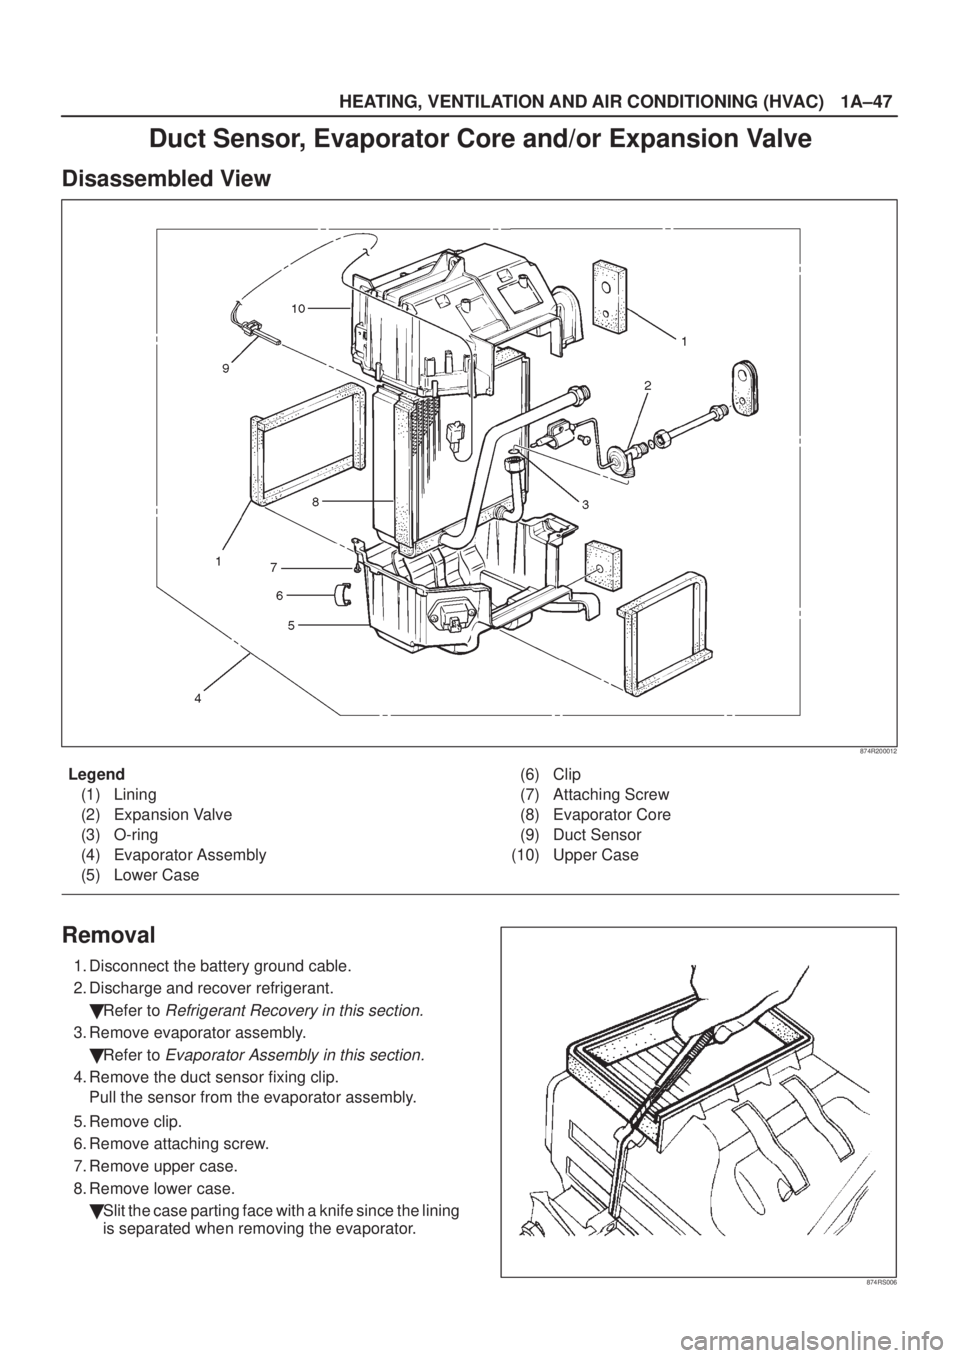 ISUZU AXIOM 2002  Service Manual PDF HEATING, VENTILATION AND AIR CONDITIONING (HVAC)
1A±47
Duct Sensor, Evaporator Core and/or Expansion Valve
Disassembled View
874R200012
Legend
(1) Lining
(2) Expansion Valve
(3) O-ring
(4) Evaporator